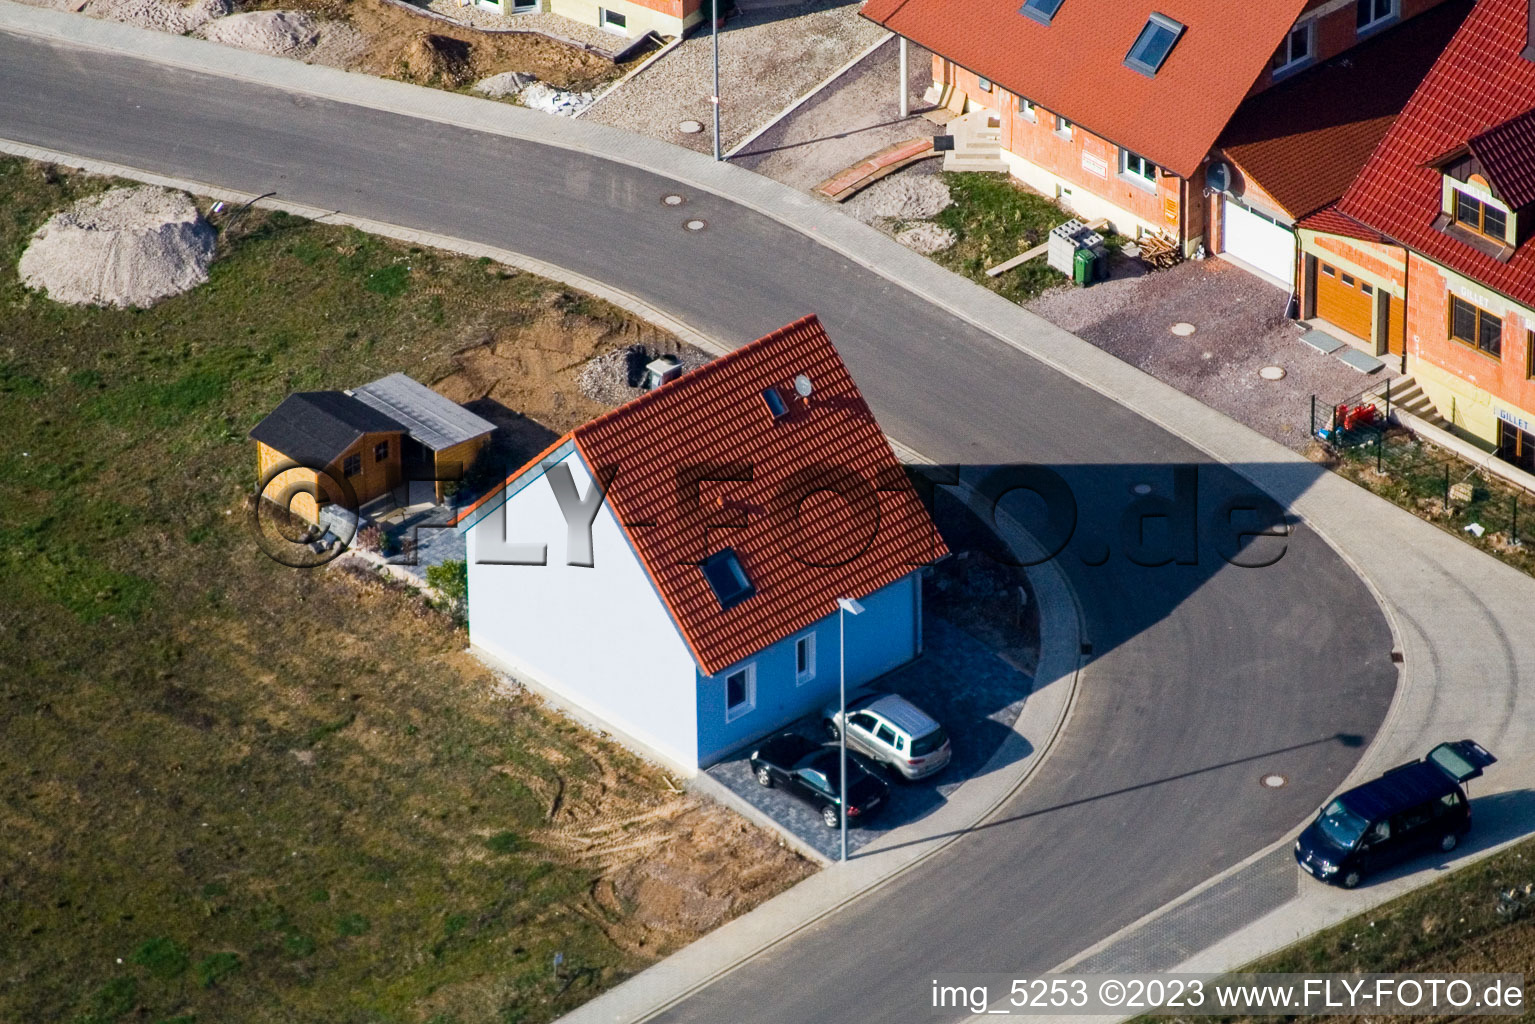 New development area NE in the district Schaidt in Wörth am Rhein in the state Rhineland-Palatinate, Germany from a drone